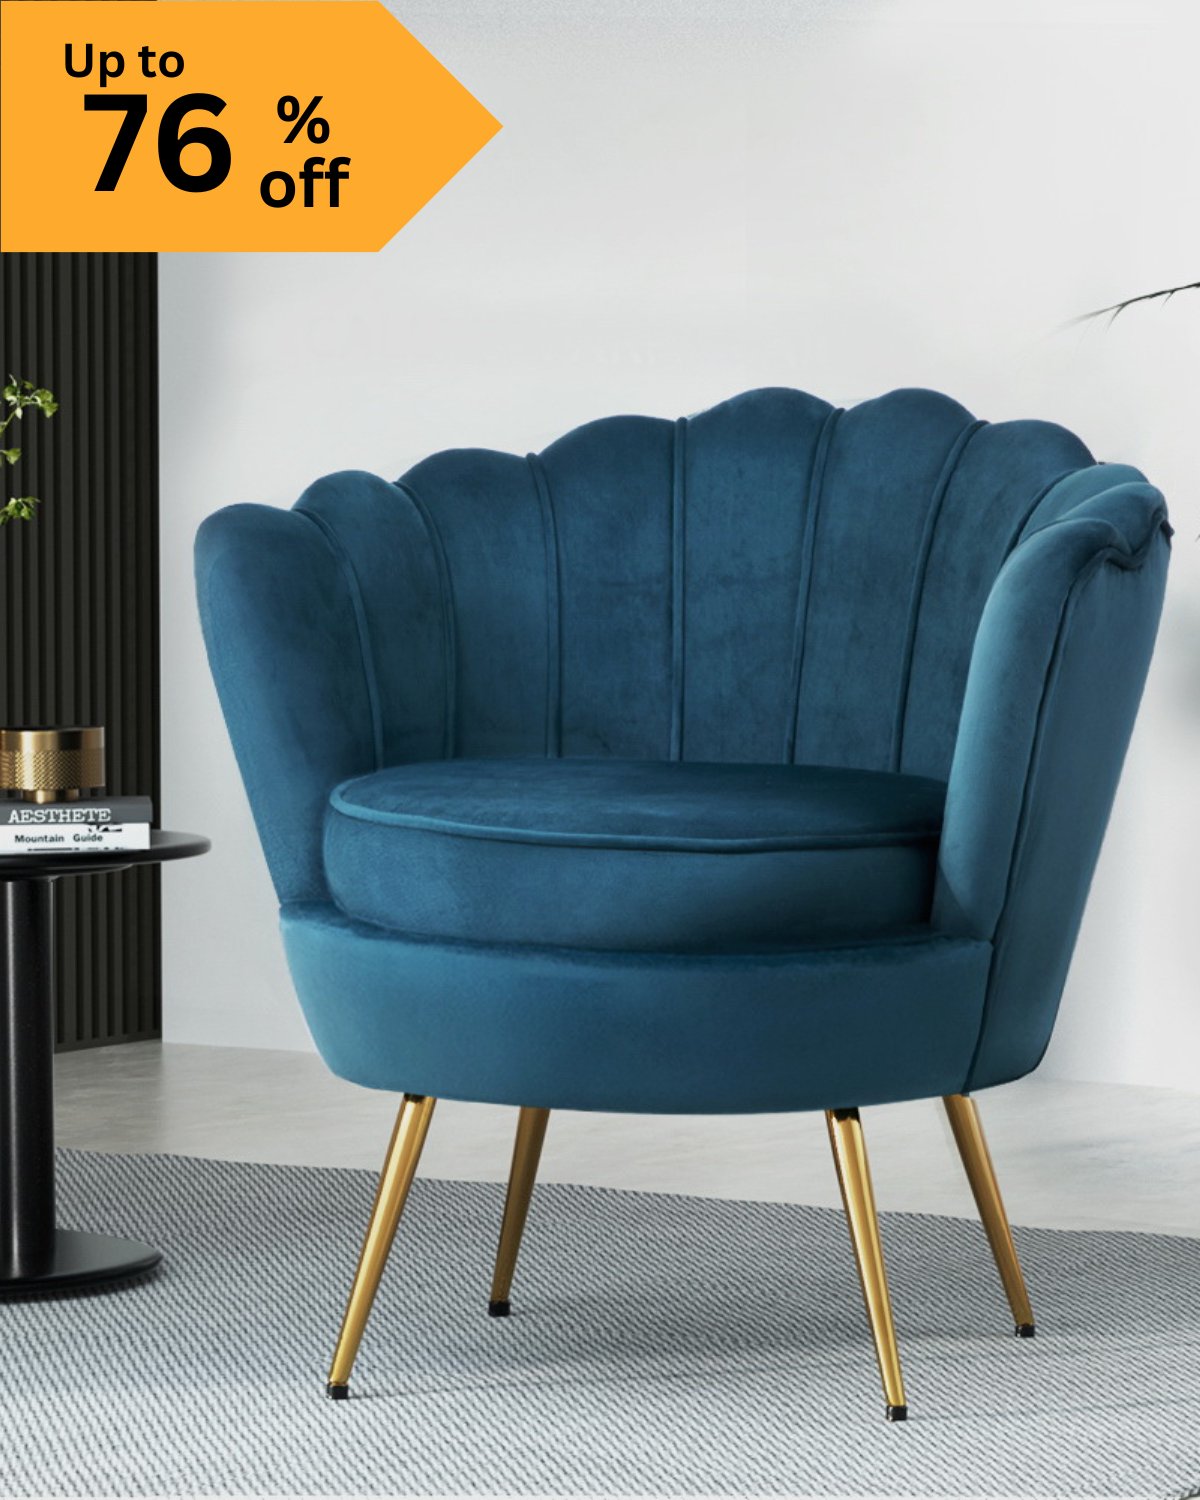 Arm chairs Deals